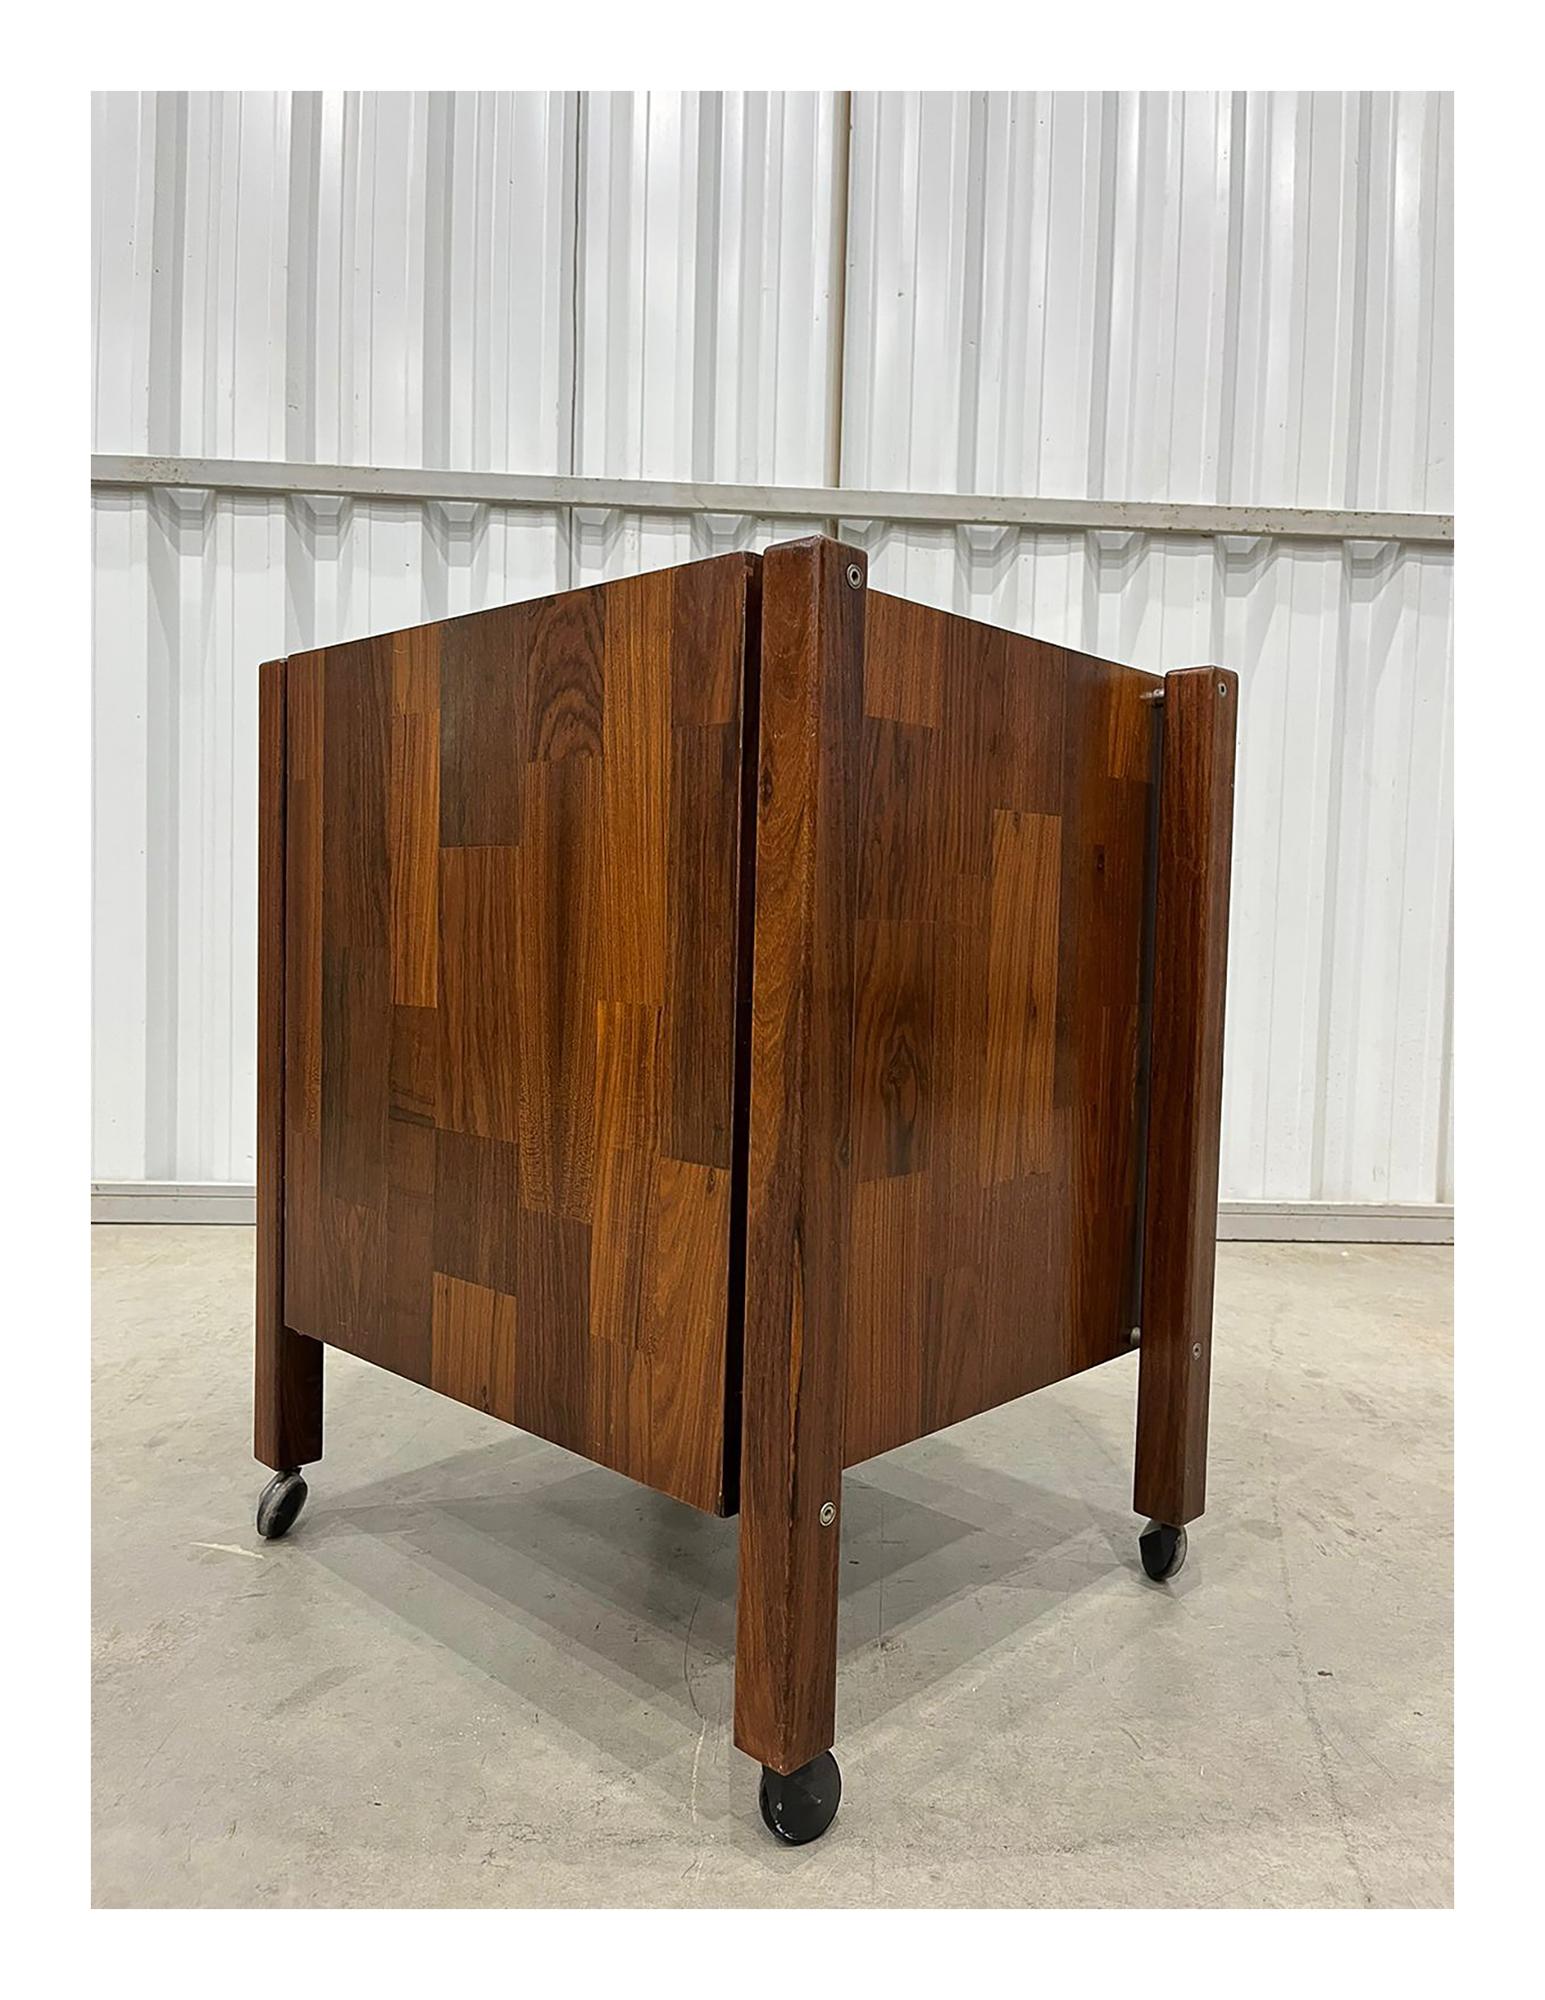 Brazilian Modern Cabinet with Three Drawers in Rosewood, Jorge Zalszupin, 1960s For Sale 3